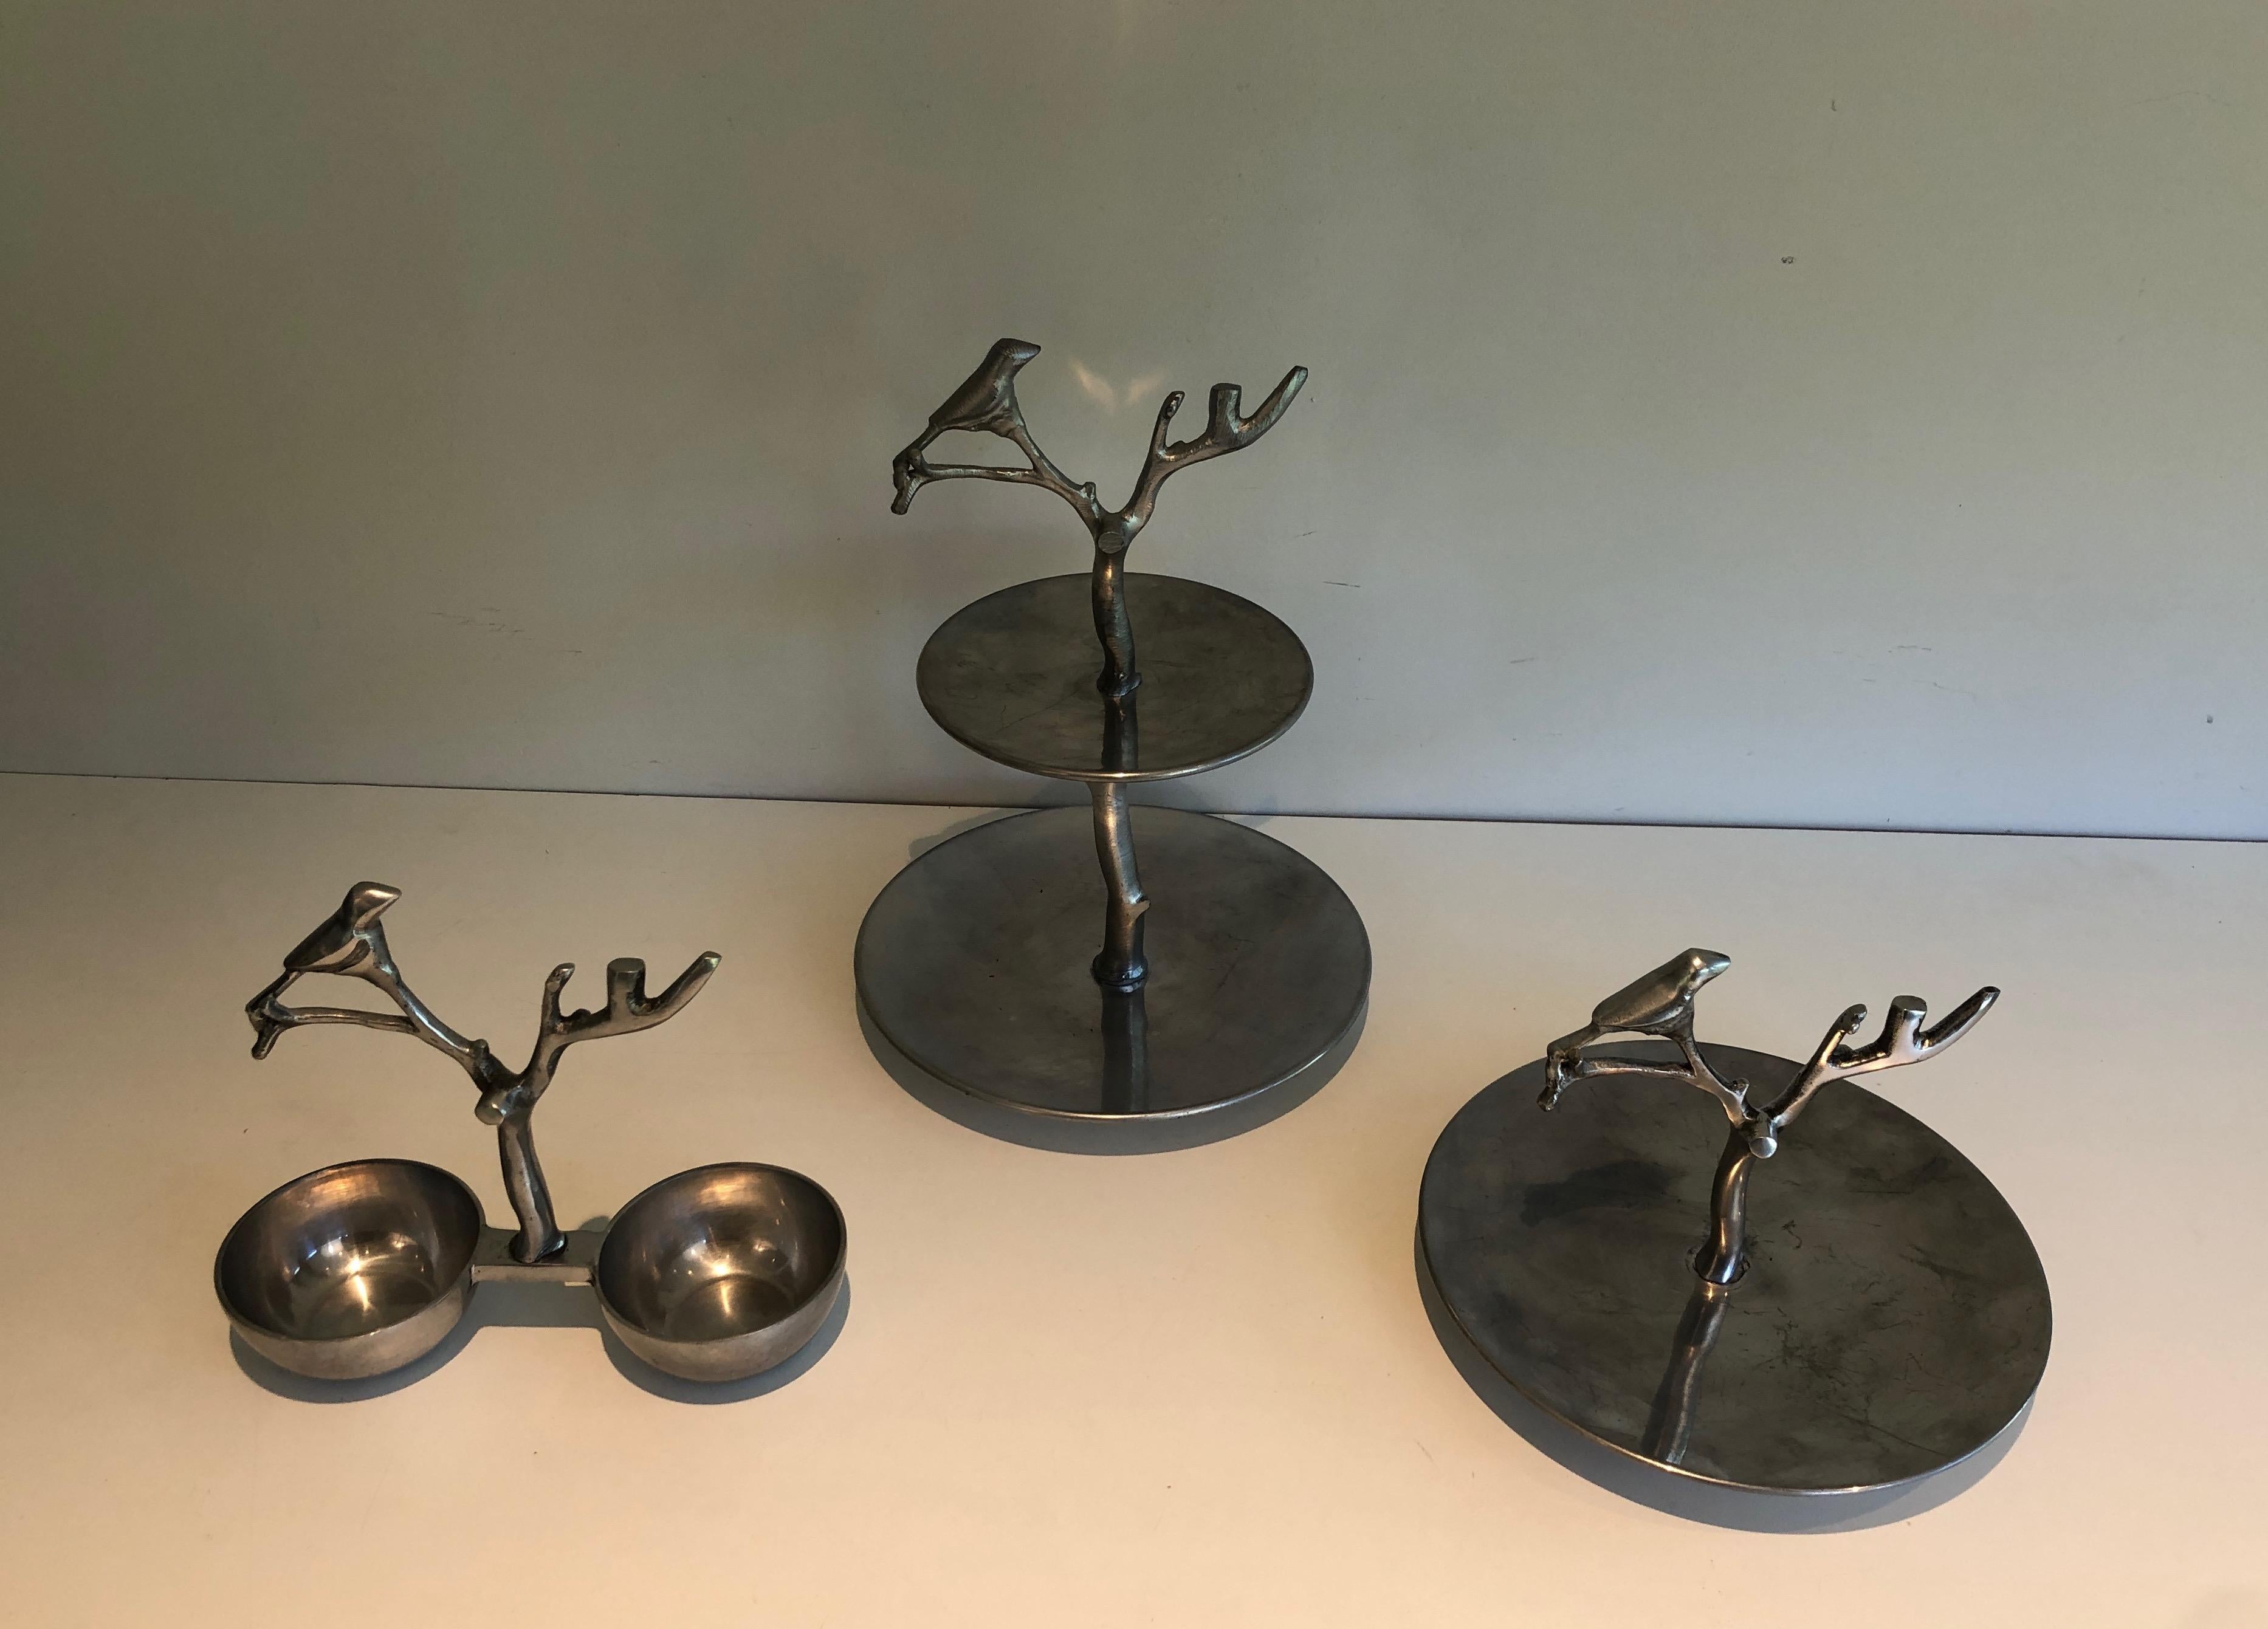 This set of 3 serving pieces with birds and branches is made of aluminum. Circa 1970.